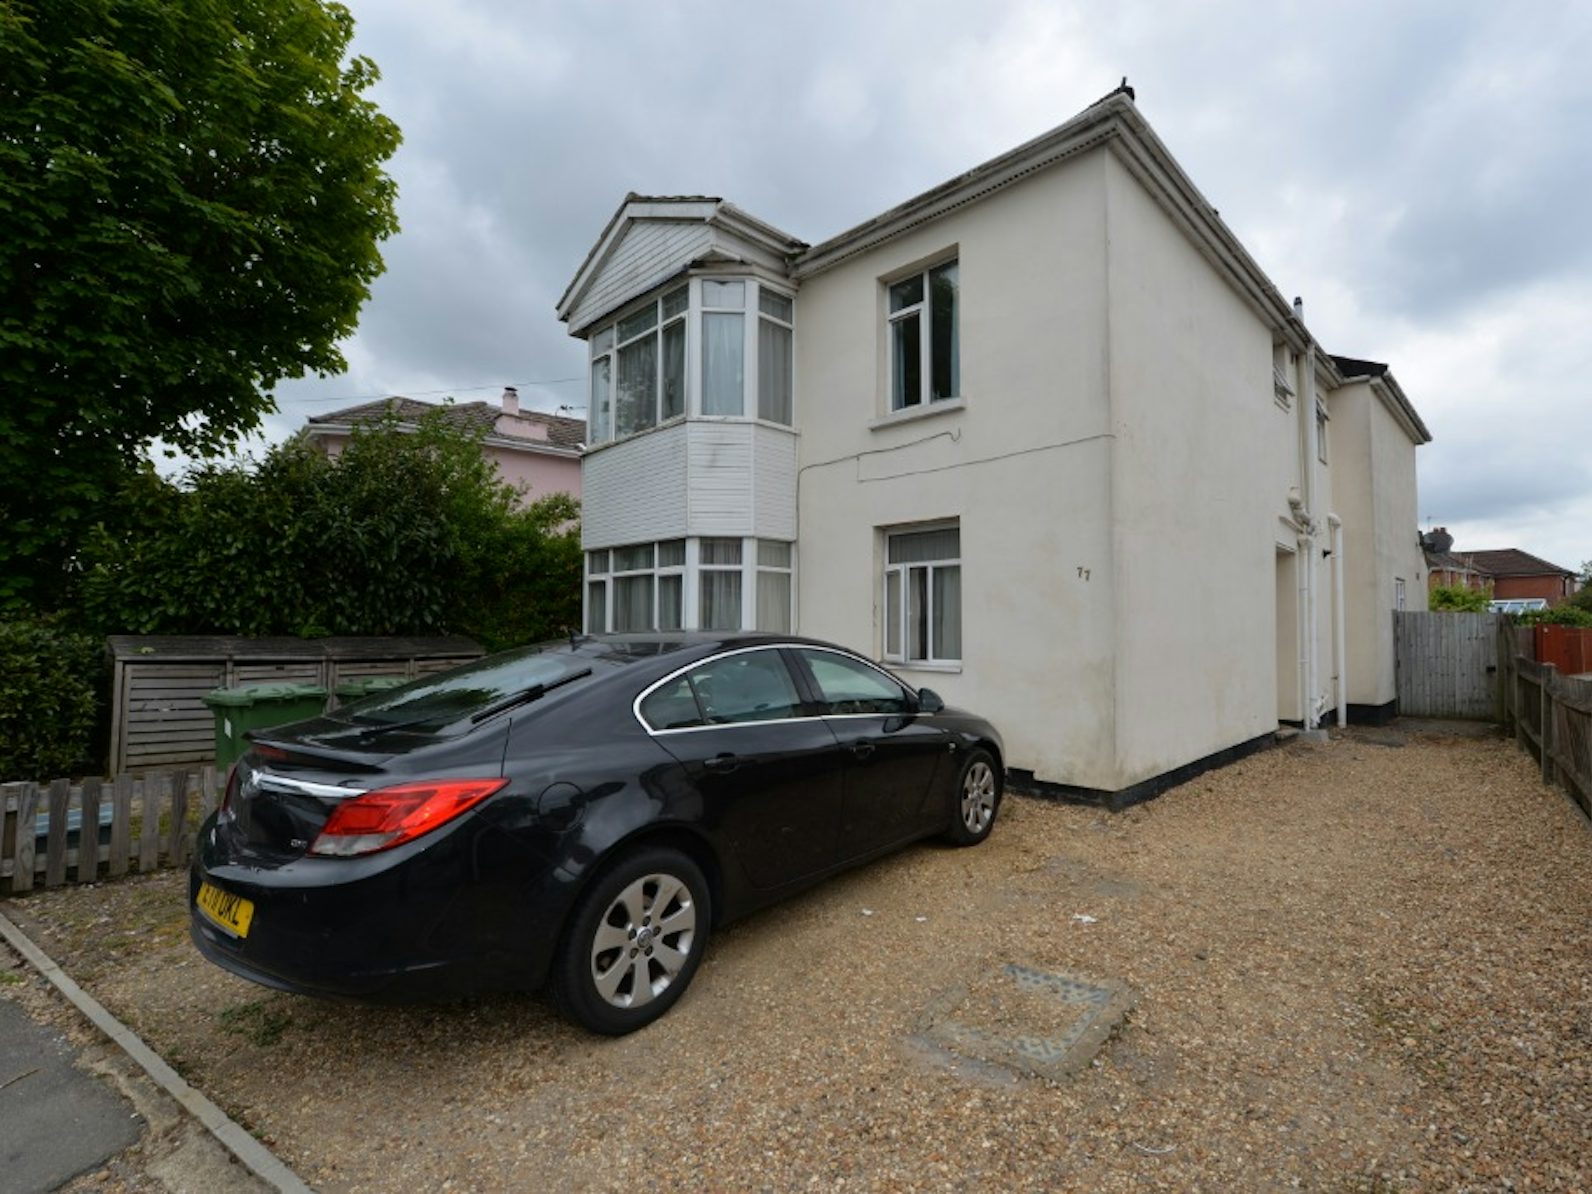 Detached House for sale on Anglesea Road Southampton, SO15